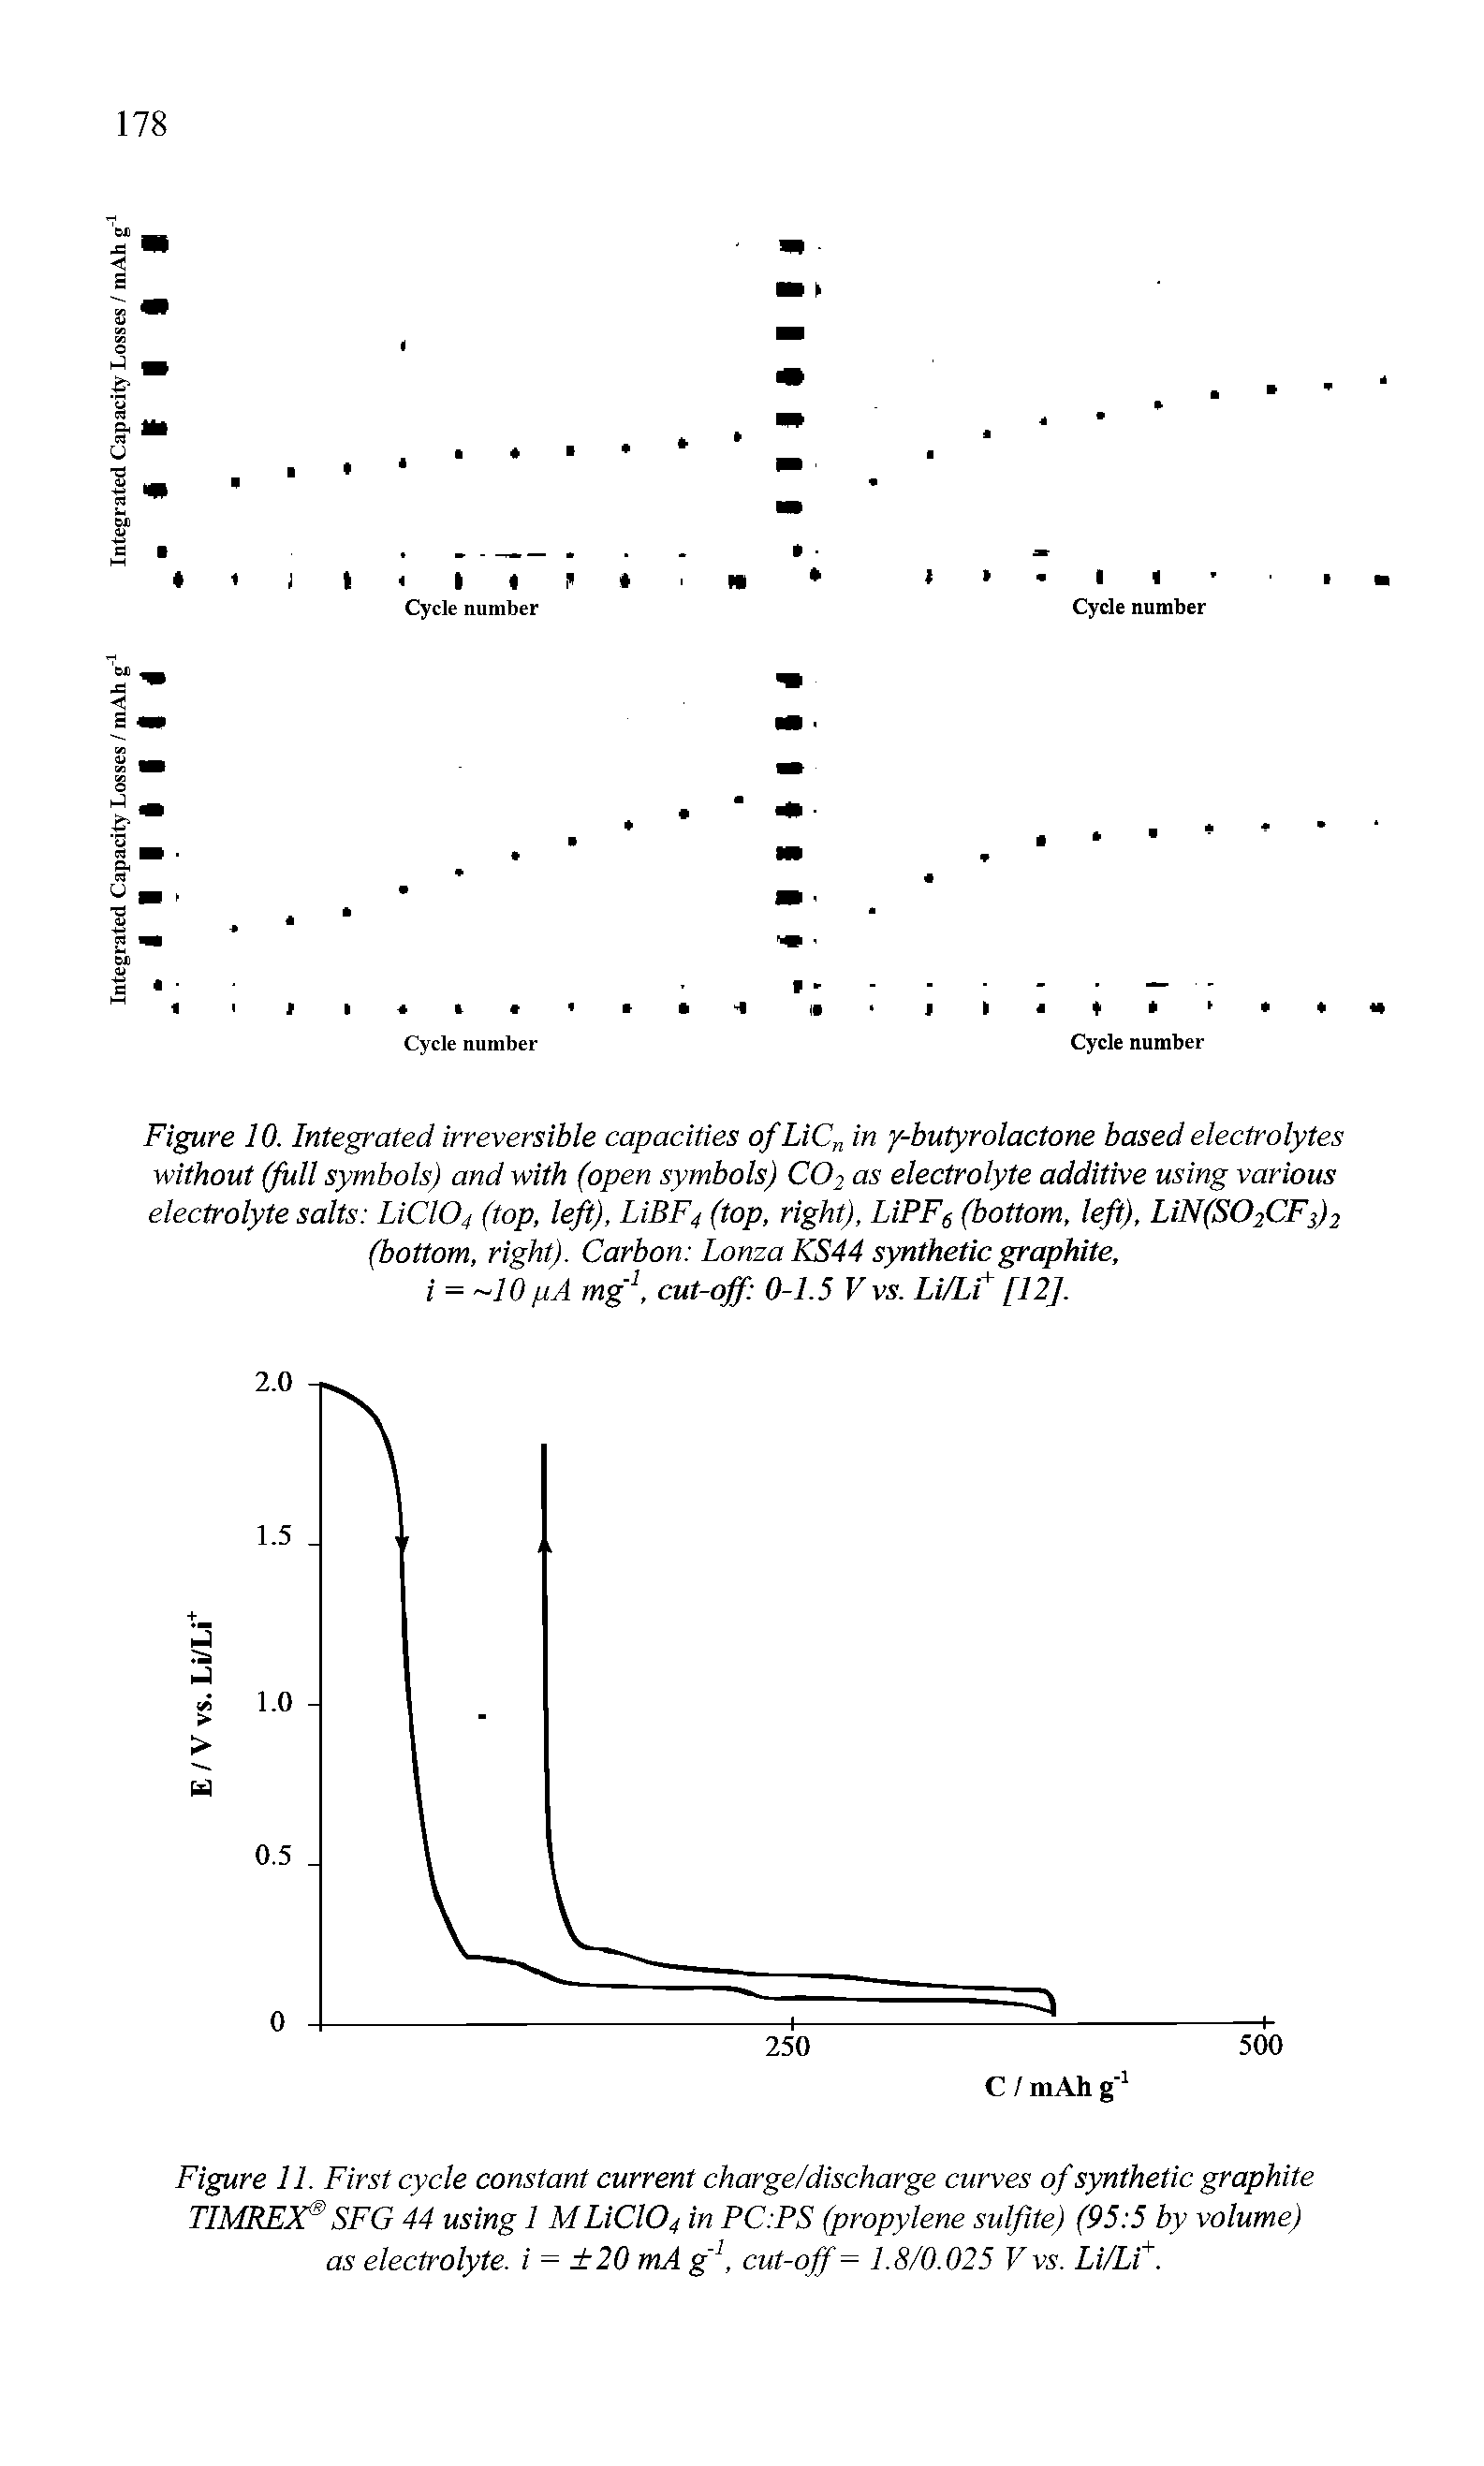 Figure 11. First cycle constant current charge/discharge curves of synthetic graphite TIMREX SFG 44 using 1 MLiCl04 in PC PS (propylene sulfite) (95 5 by volume) as electrolyte, i = +20 mA g1, cut-off = 1.8/0.025 Vvs. Li/Li+.